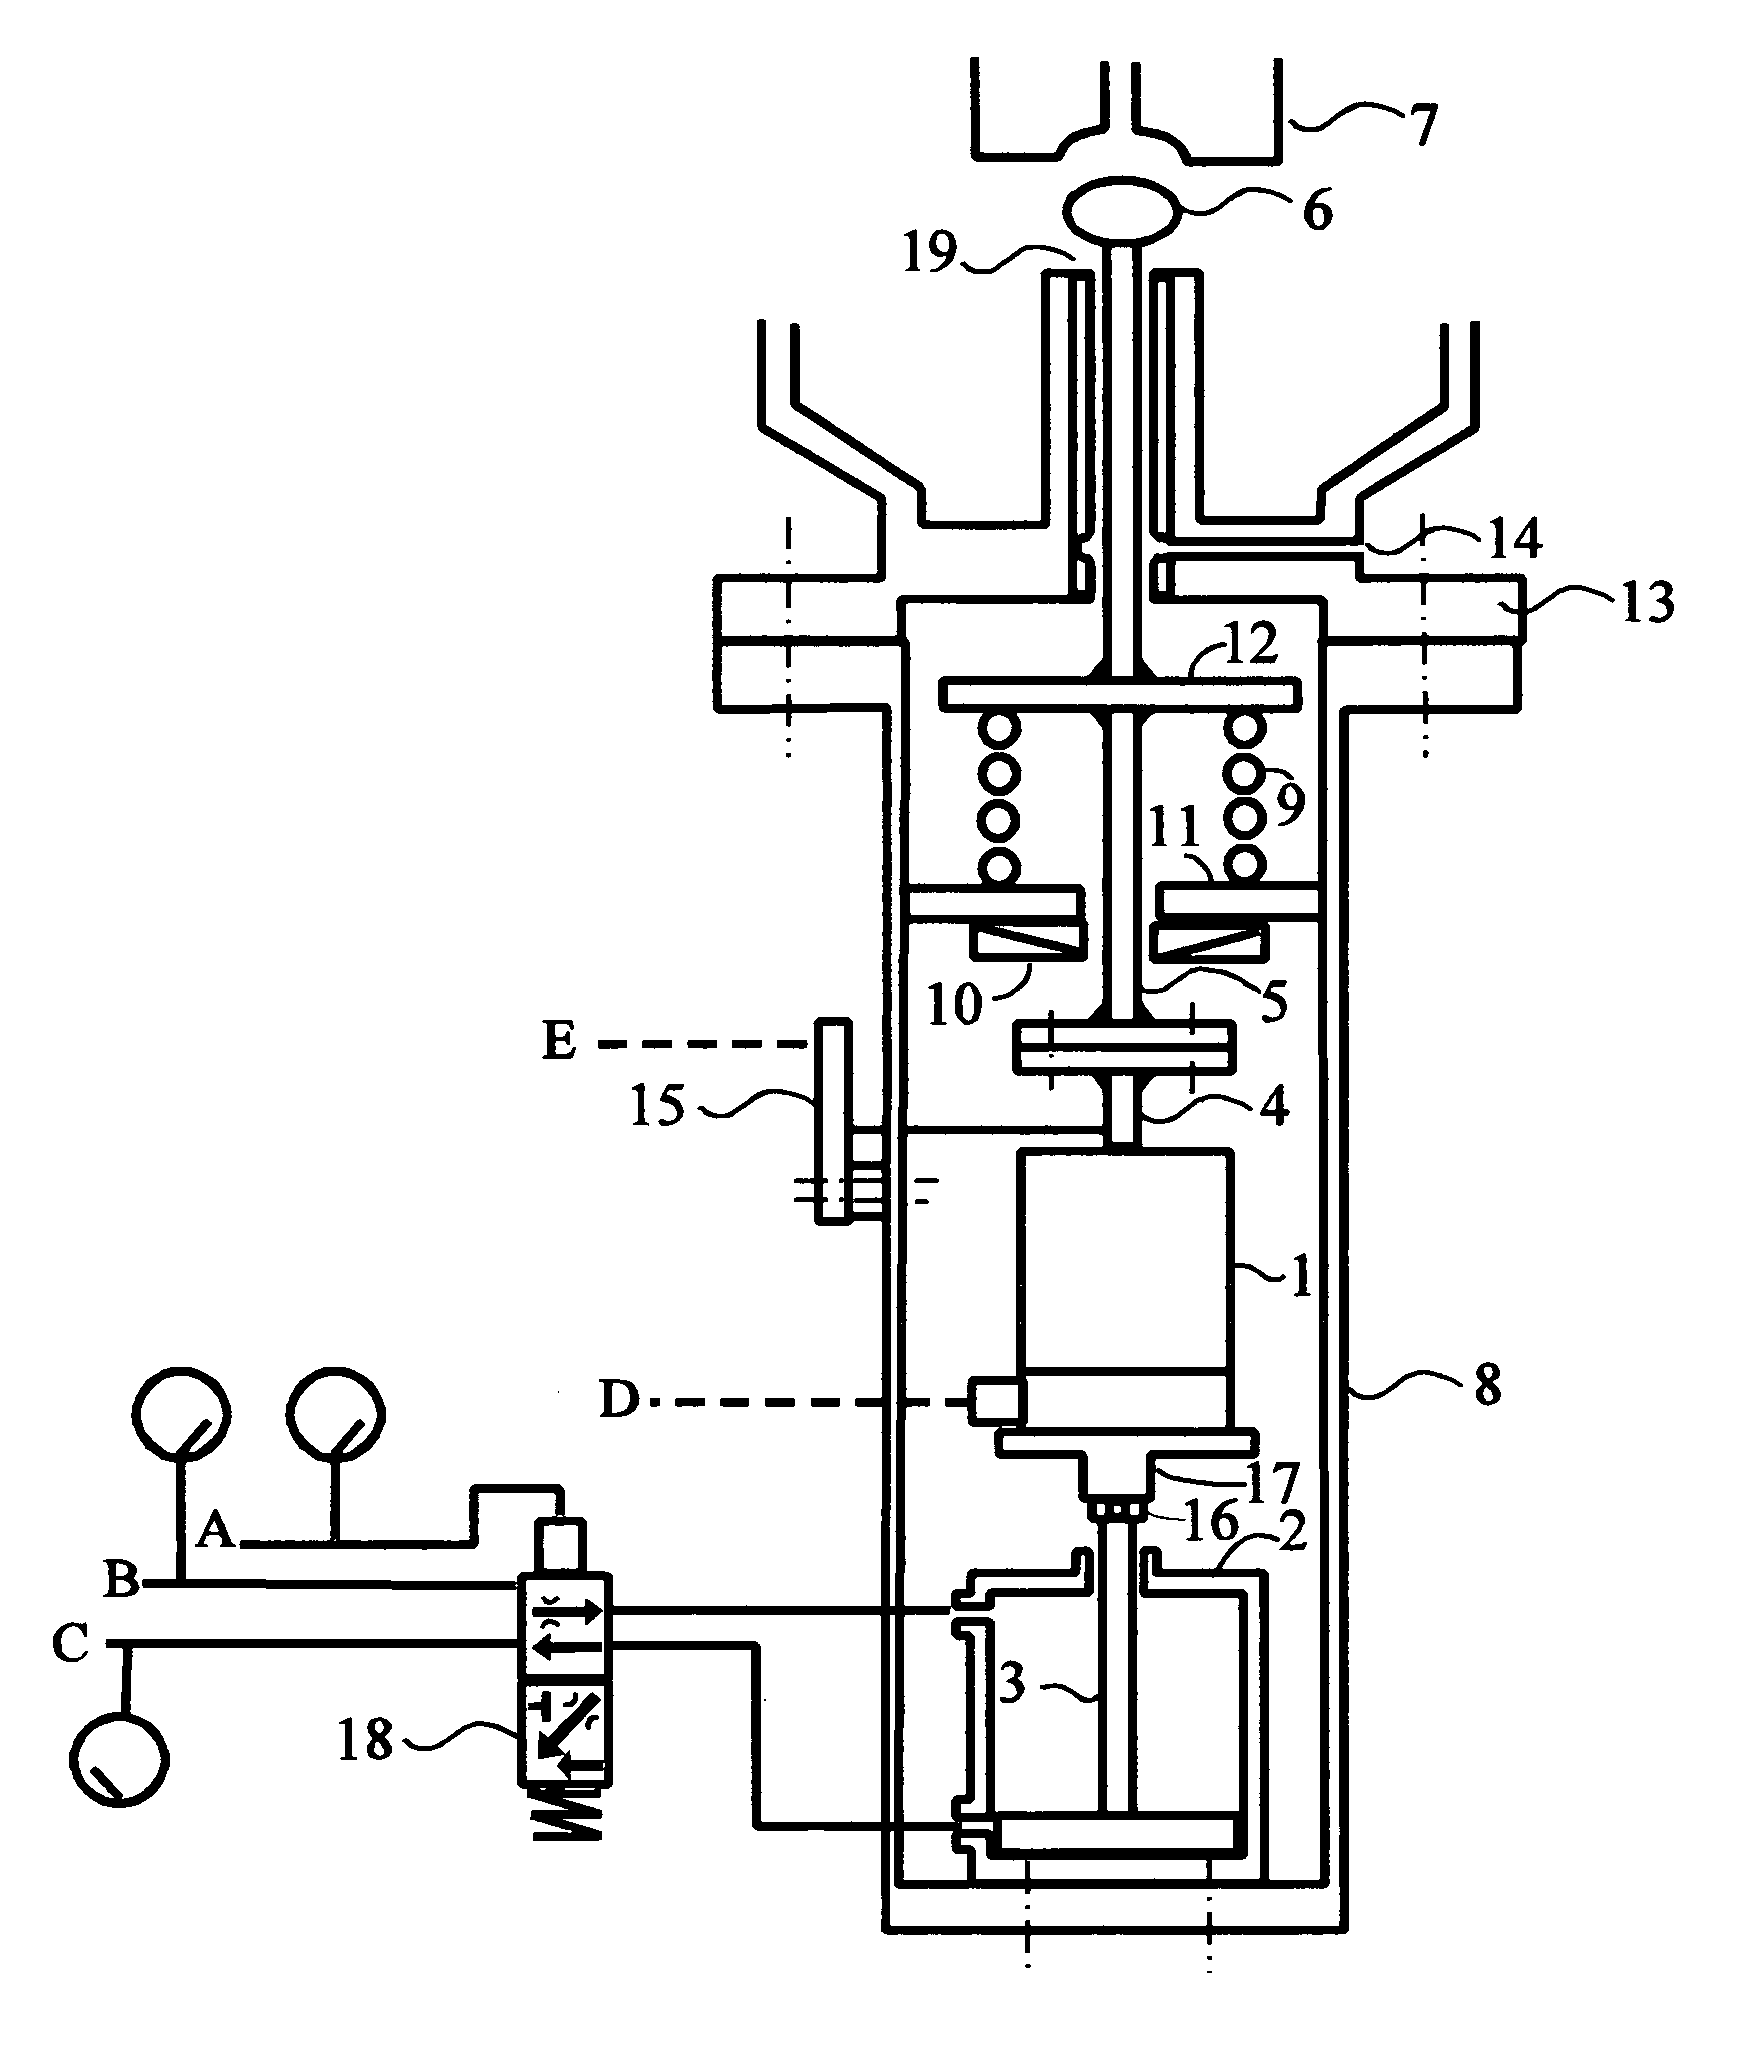 Linear electrical drive actuator apparatus with tandem fail safe hydraulic override for steam turbine valve position control